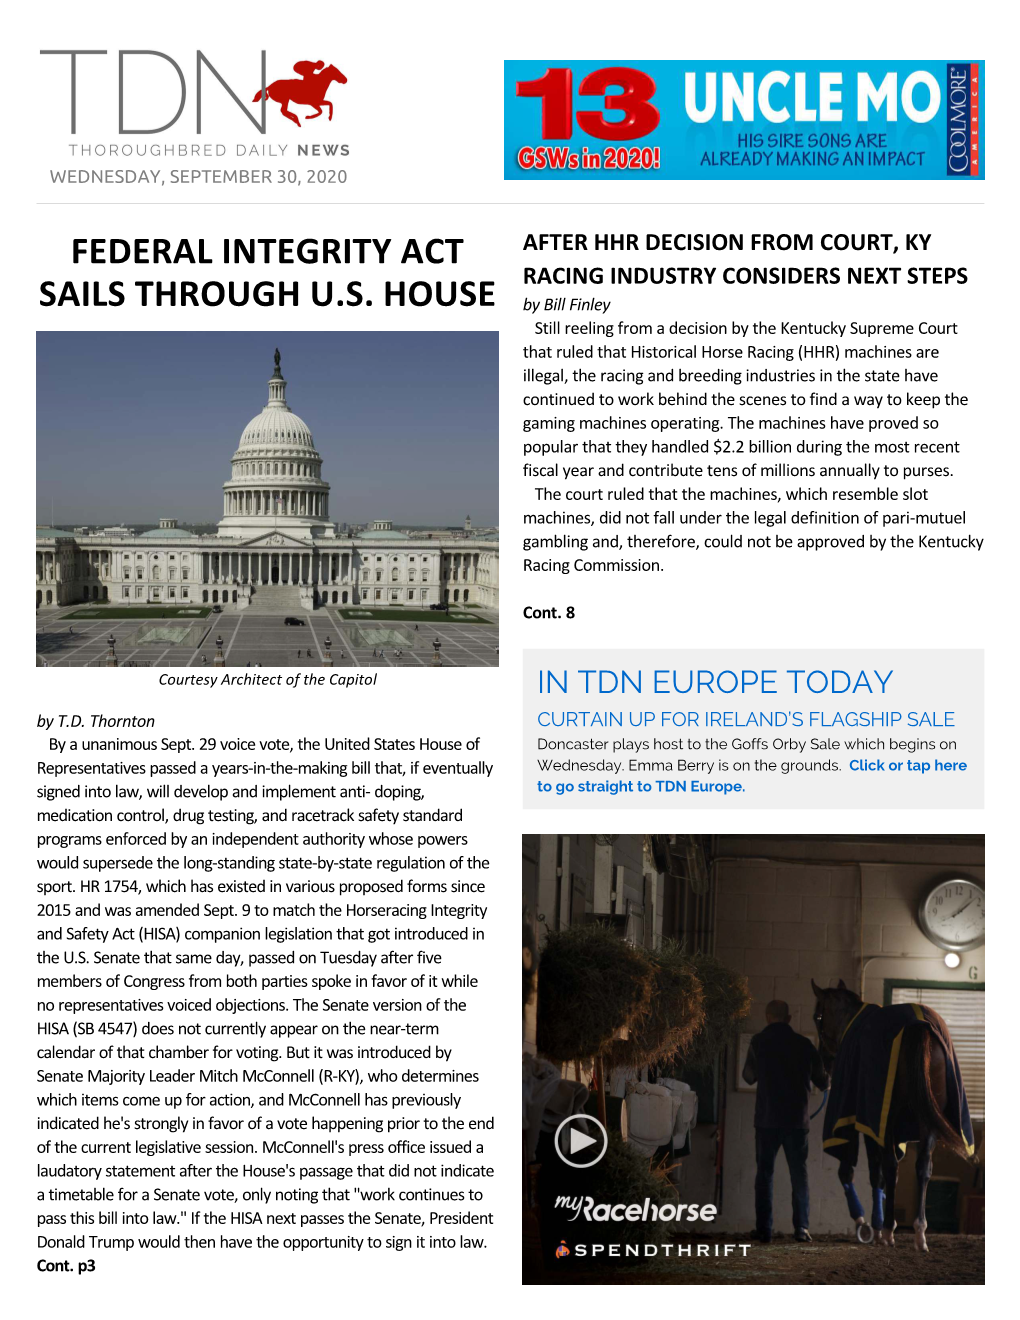 Federal Integrity Act Sails Through U.S. House